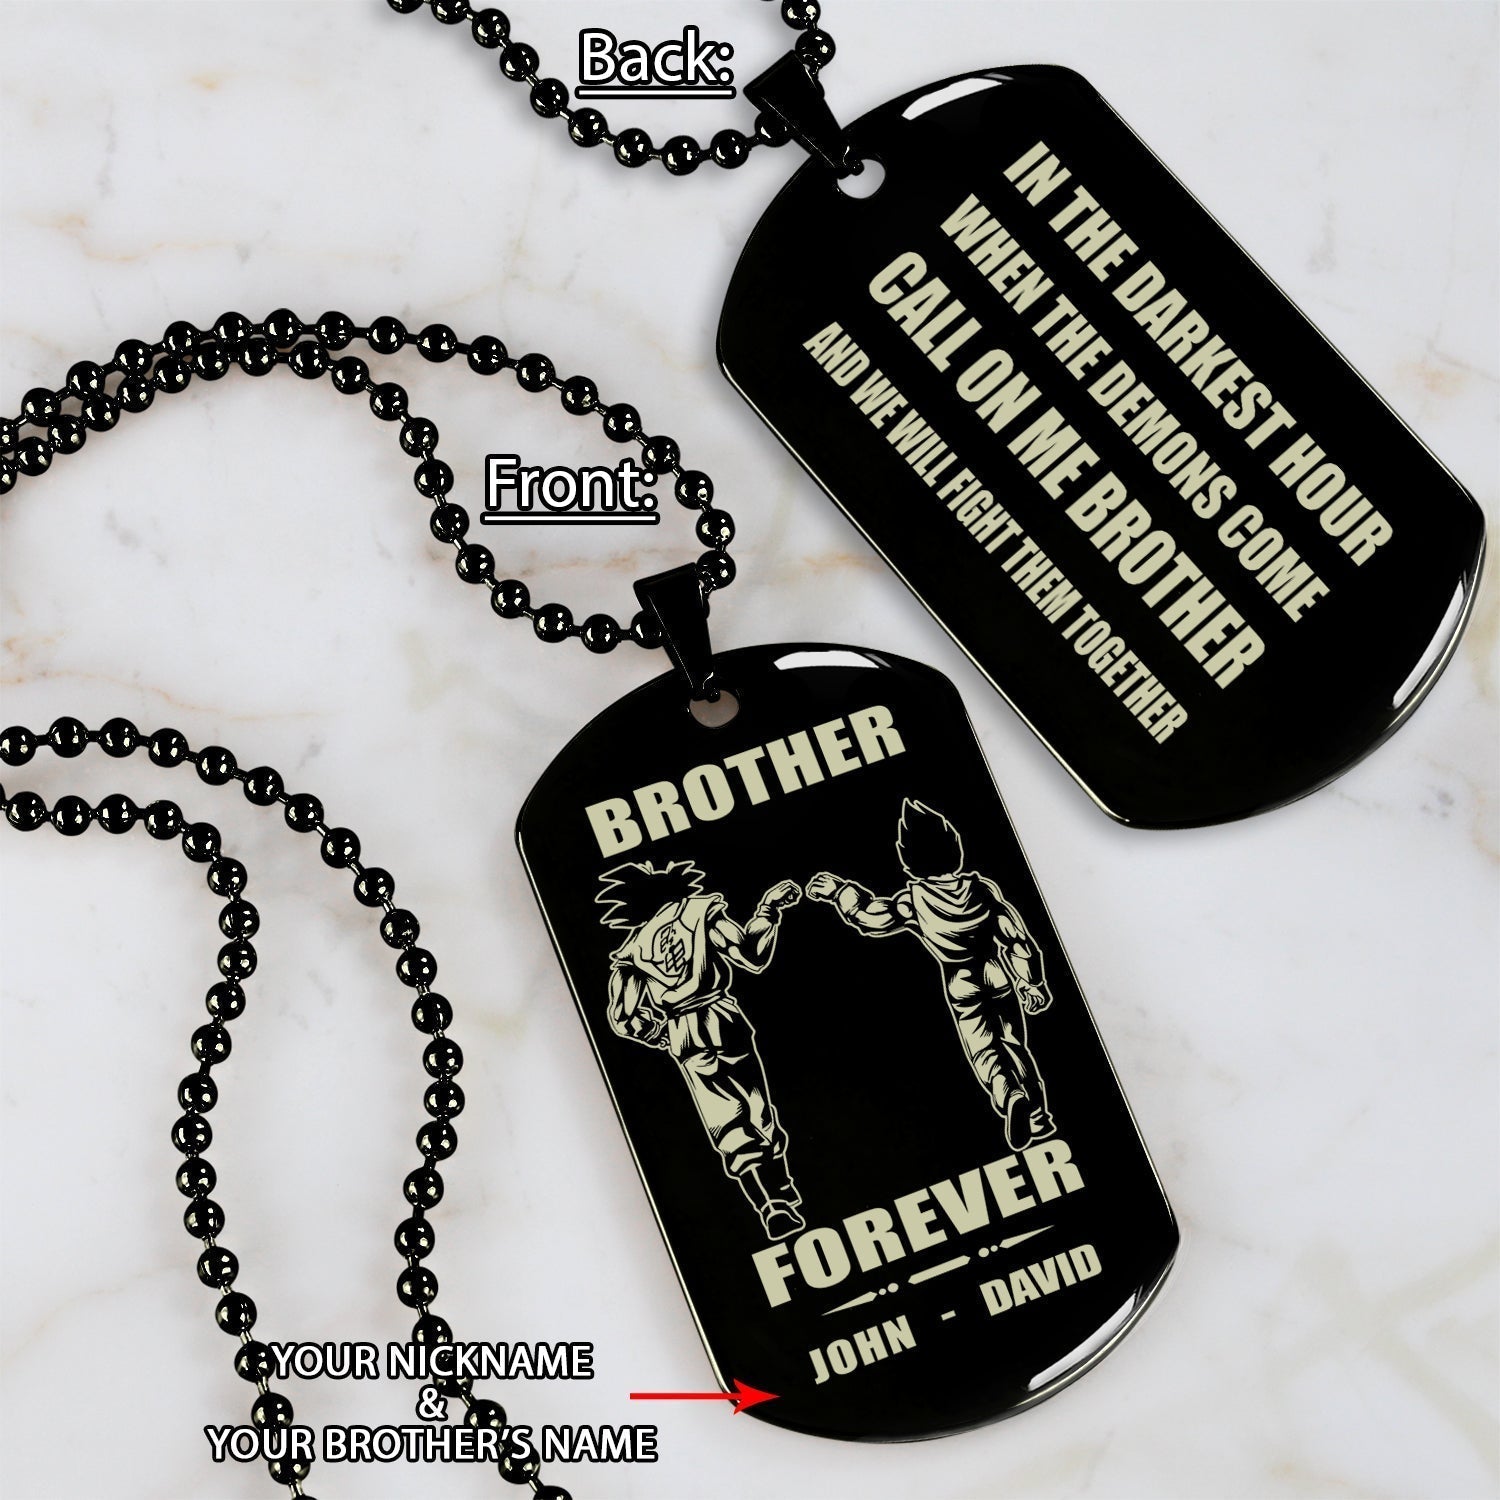 Customizable engraved brother dog tag double sided gift from brother, In the darkest hour, When the demons come call on me brother and we will fight them together, brother forever